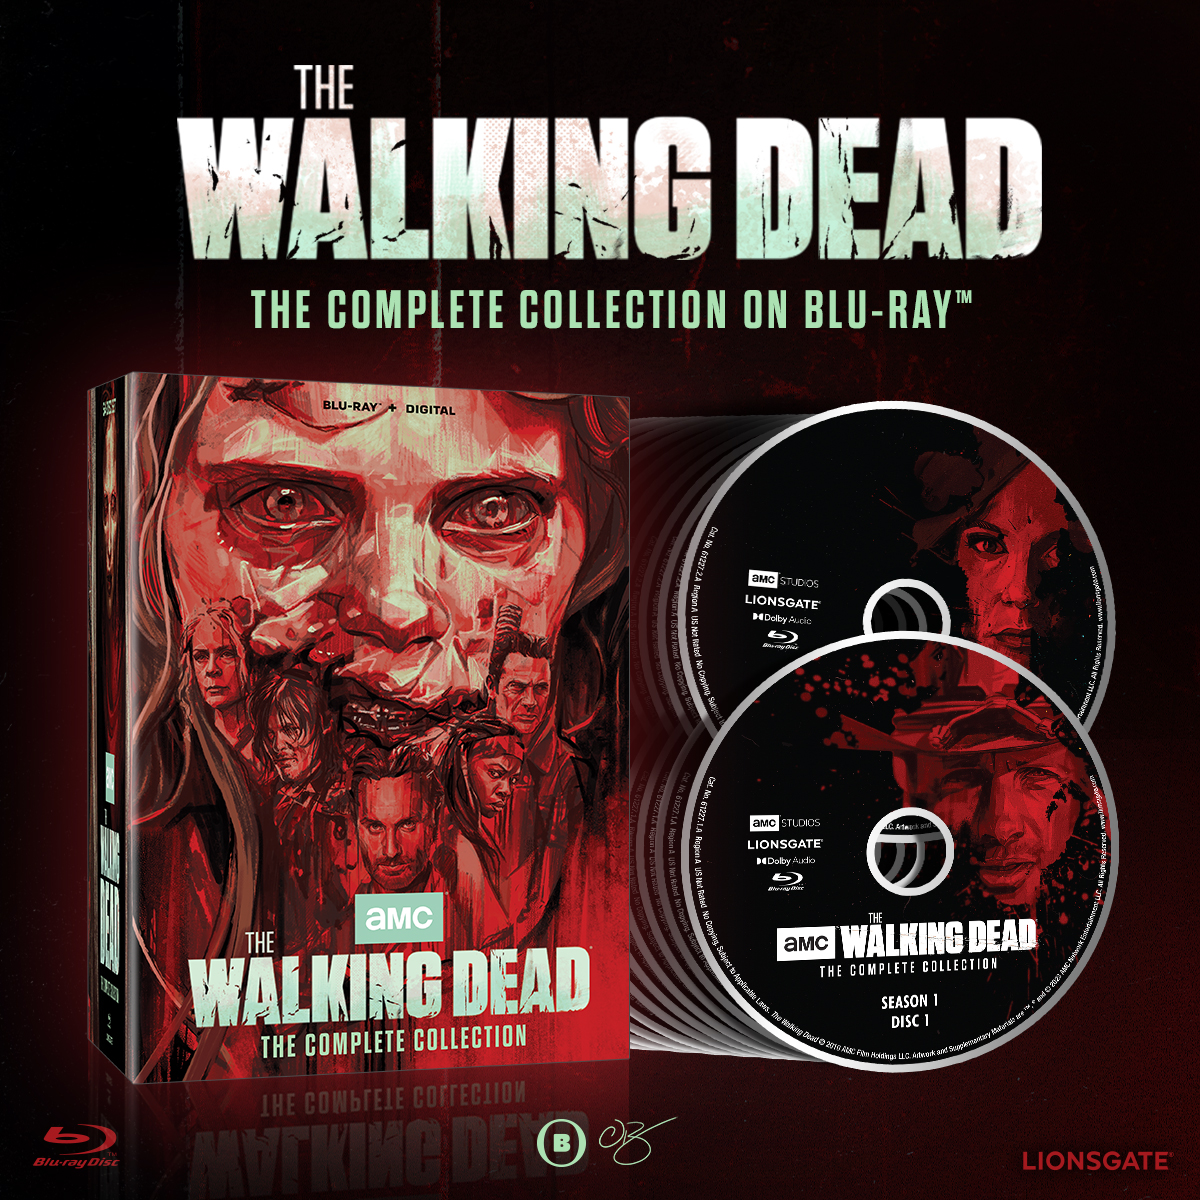 The Walking Dead The Complete Collection Blu-Ray cover (Lionsgate)